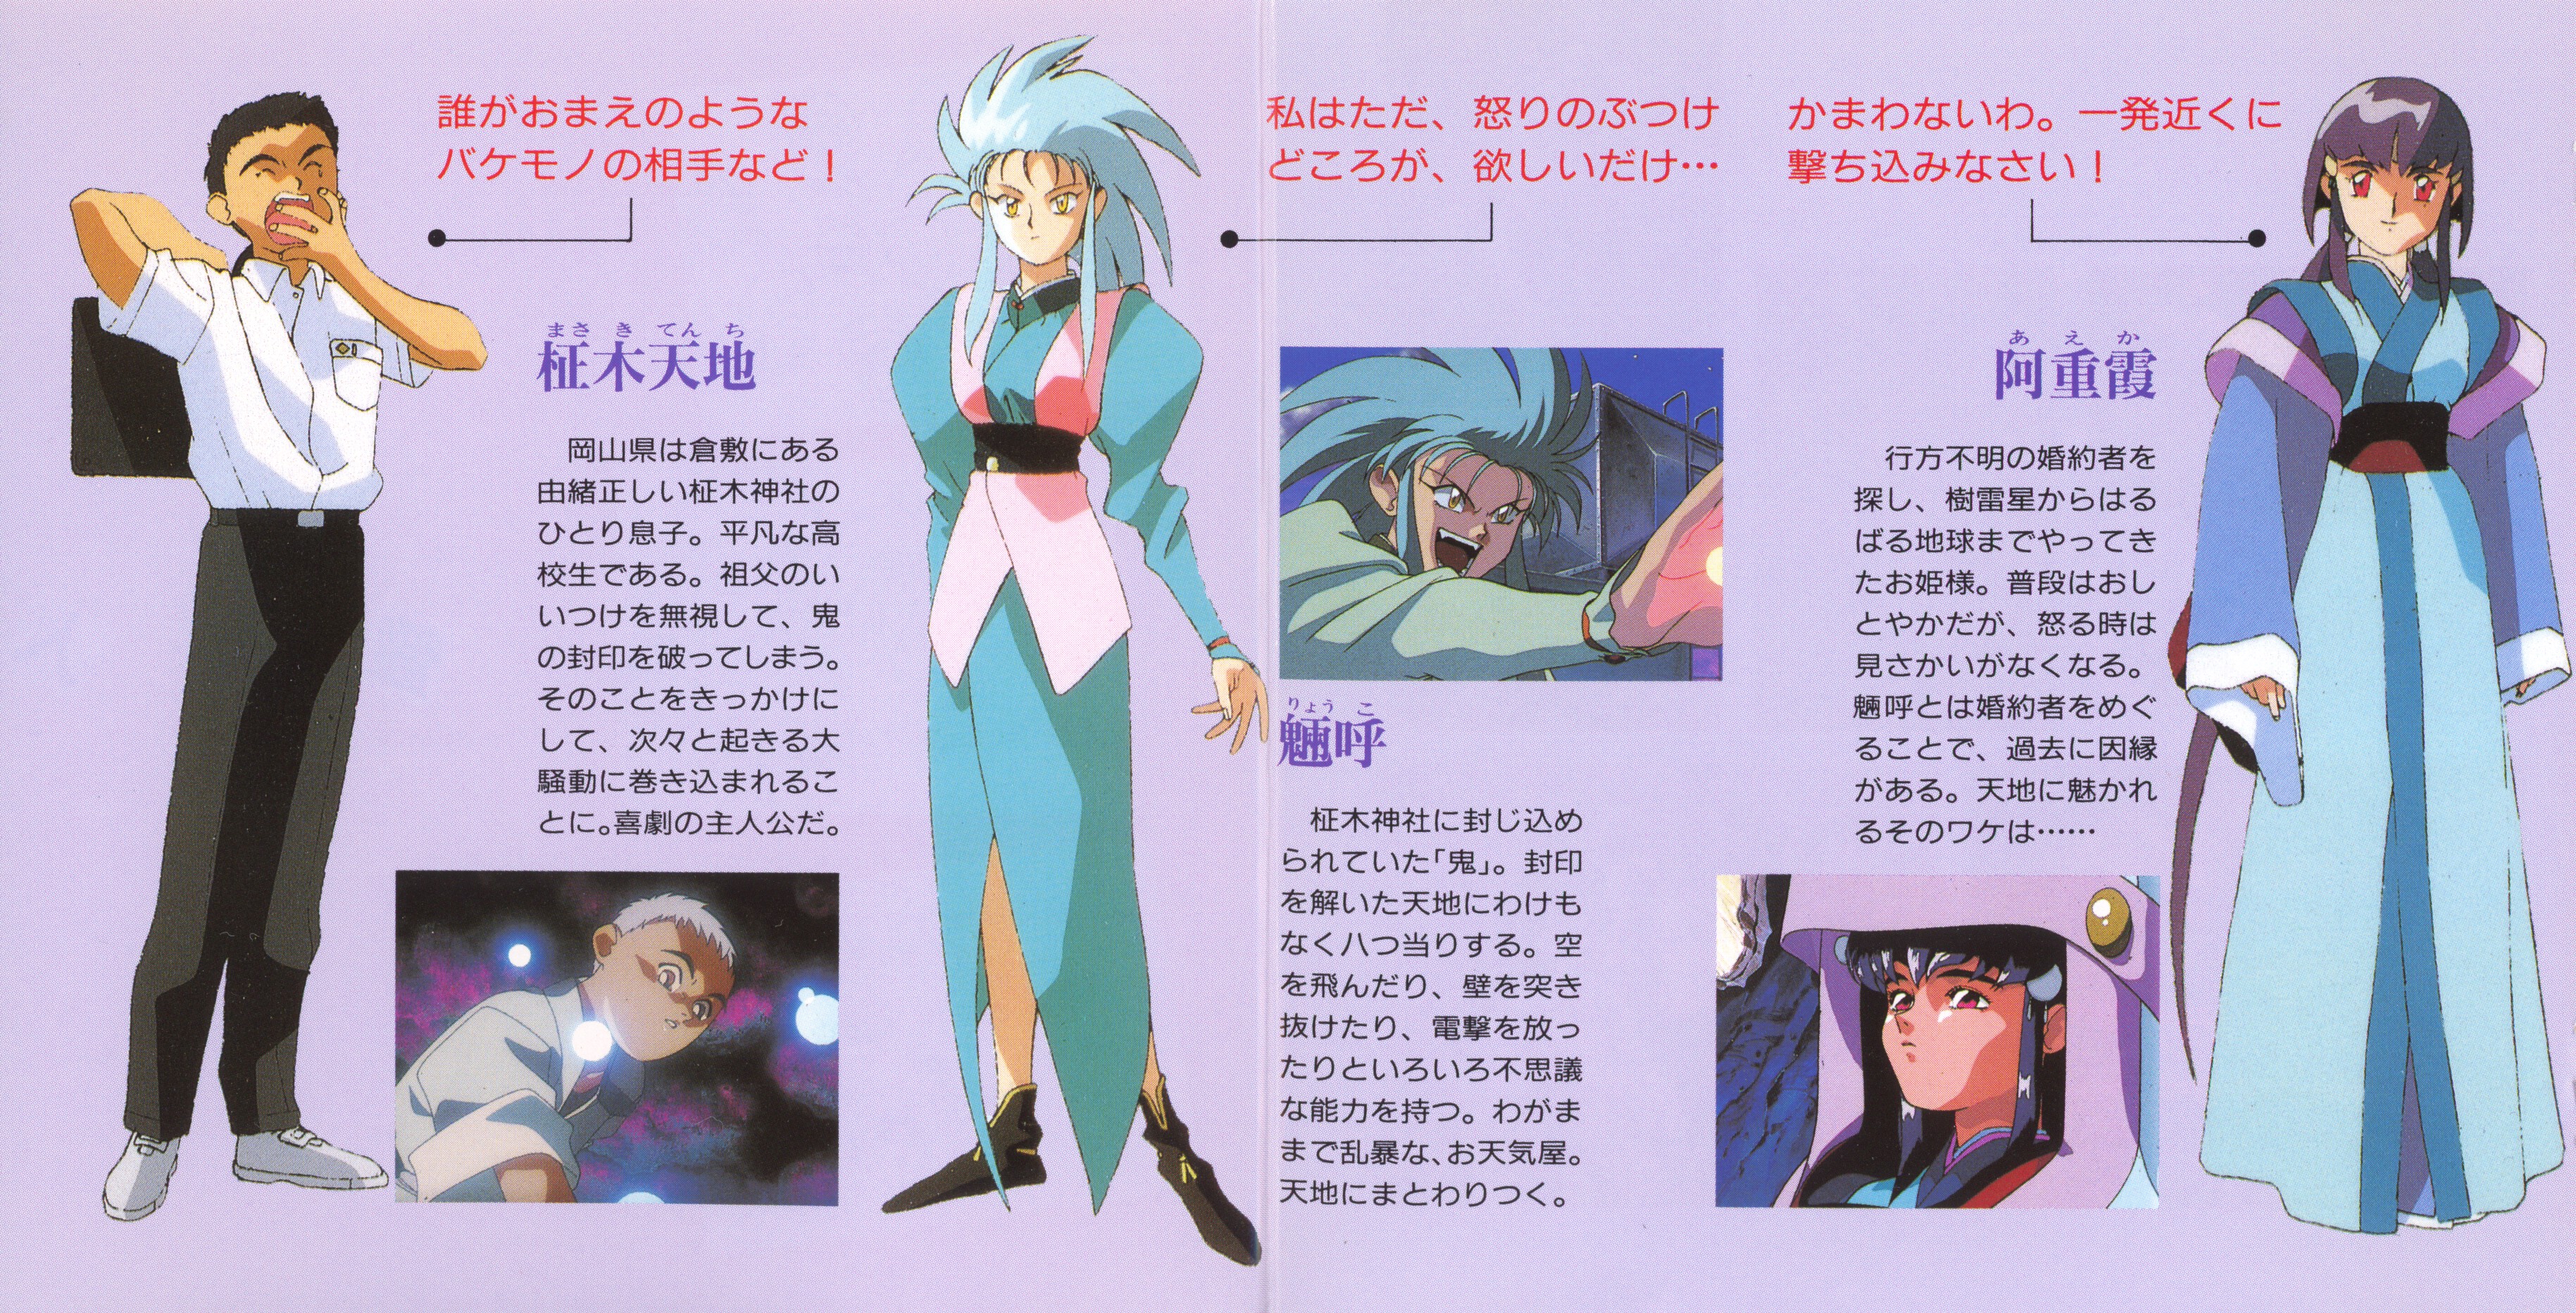 An album jacket showing characters from Tenchi Muyo in a lineup on a solid color background with quotations